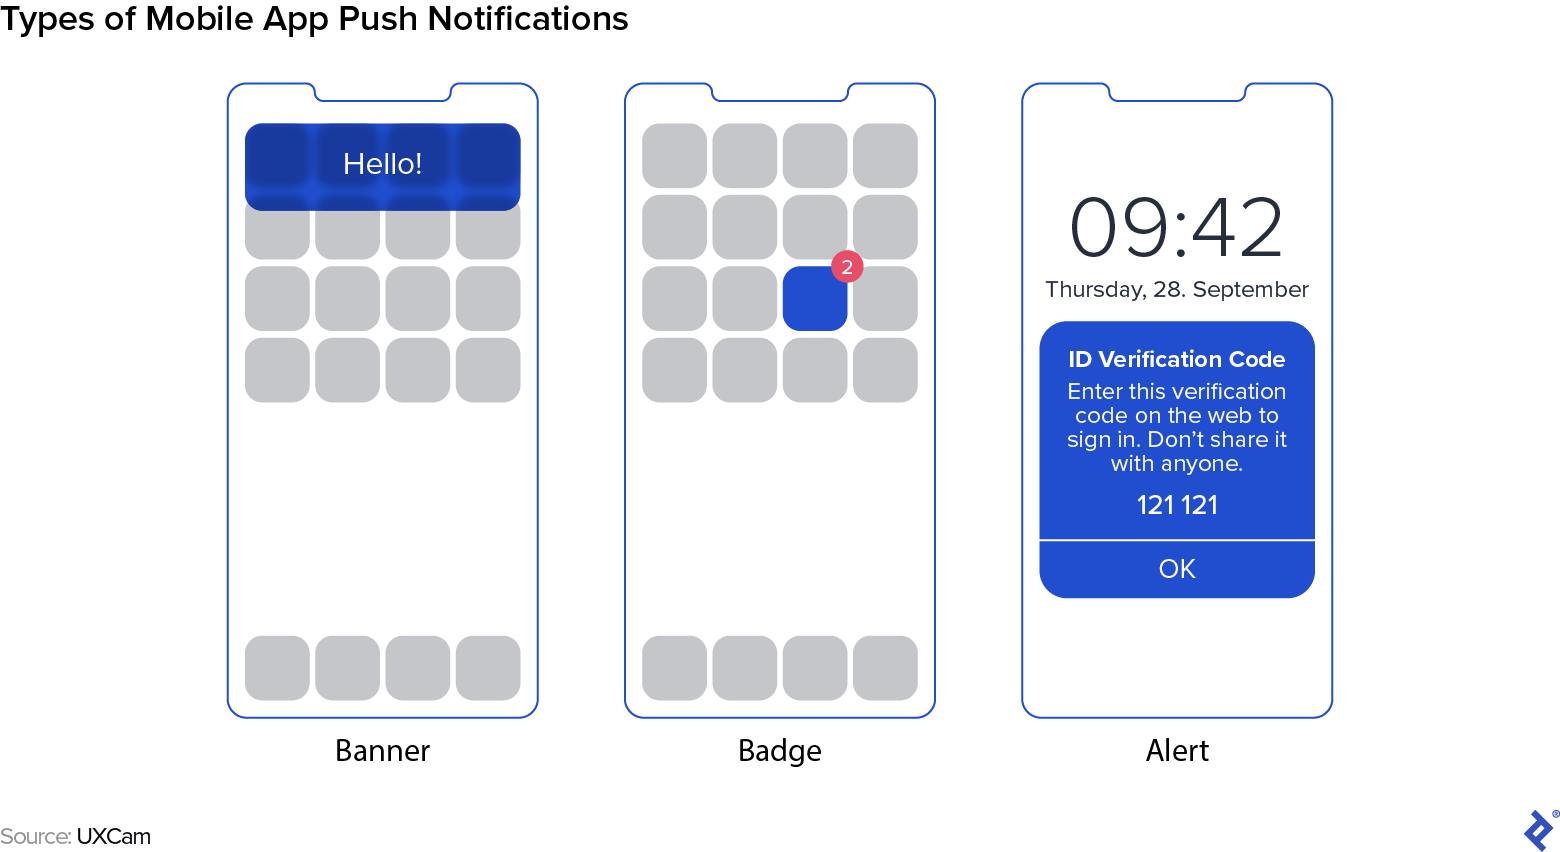 Outline drawings of three mobile phones. The one on the left shows a blue banner mobile app push notification with the word “Hello!” The second shows a blue app icon that stands out amid the others, which are gray. In the upper right corner of the icon is a red badge notification with the number two. The third shows a  banner on a lock screen. It has a headline that reads “ID Verification Code,” and beneath it reads: “Enter this verification code on the web to sign in. Don’t share it with anyone. 121 121.” Beneath that is an OK button that the user has to push to dismiss the alert.